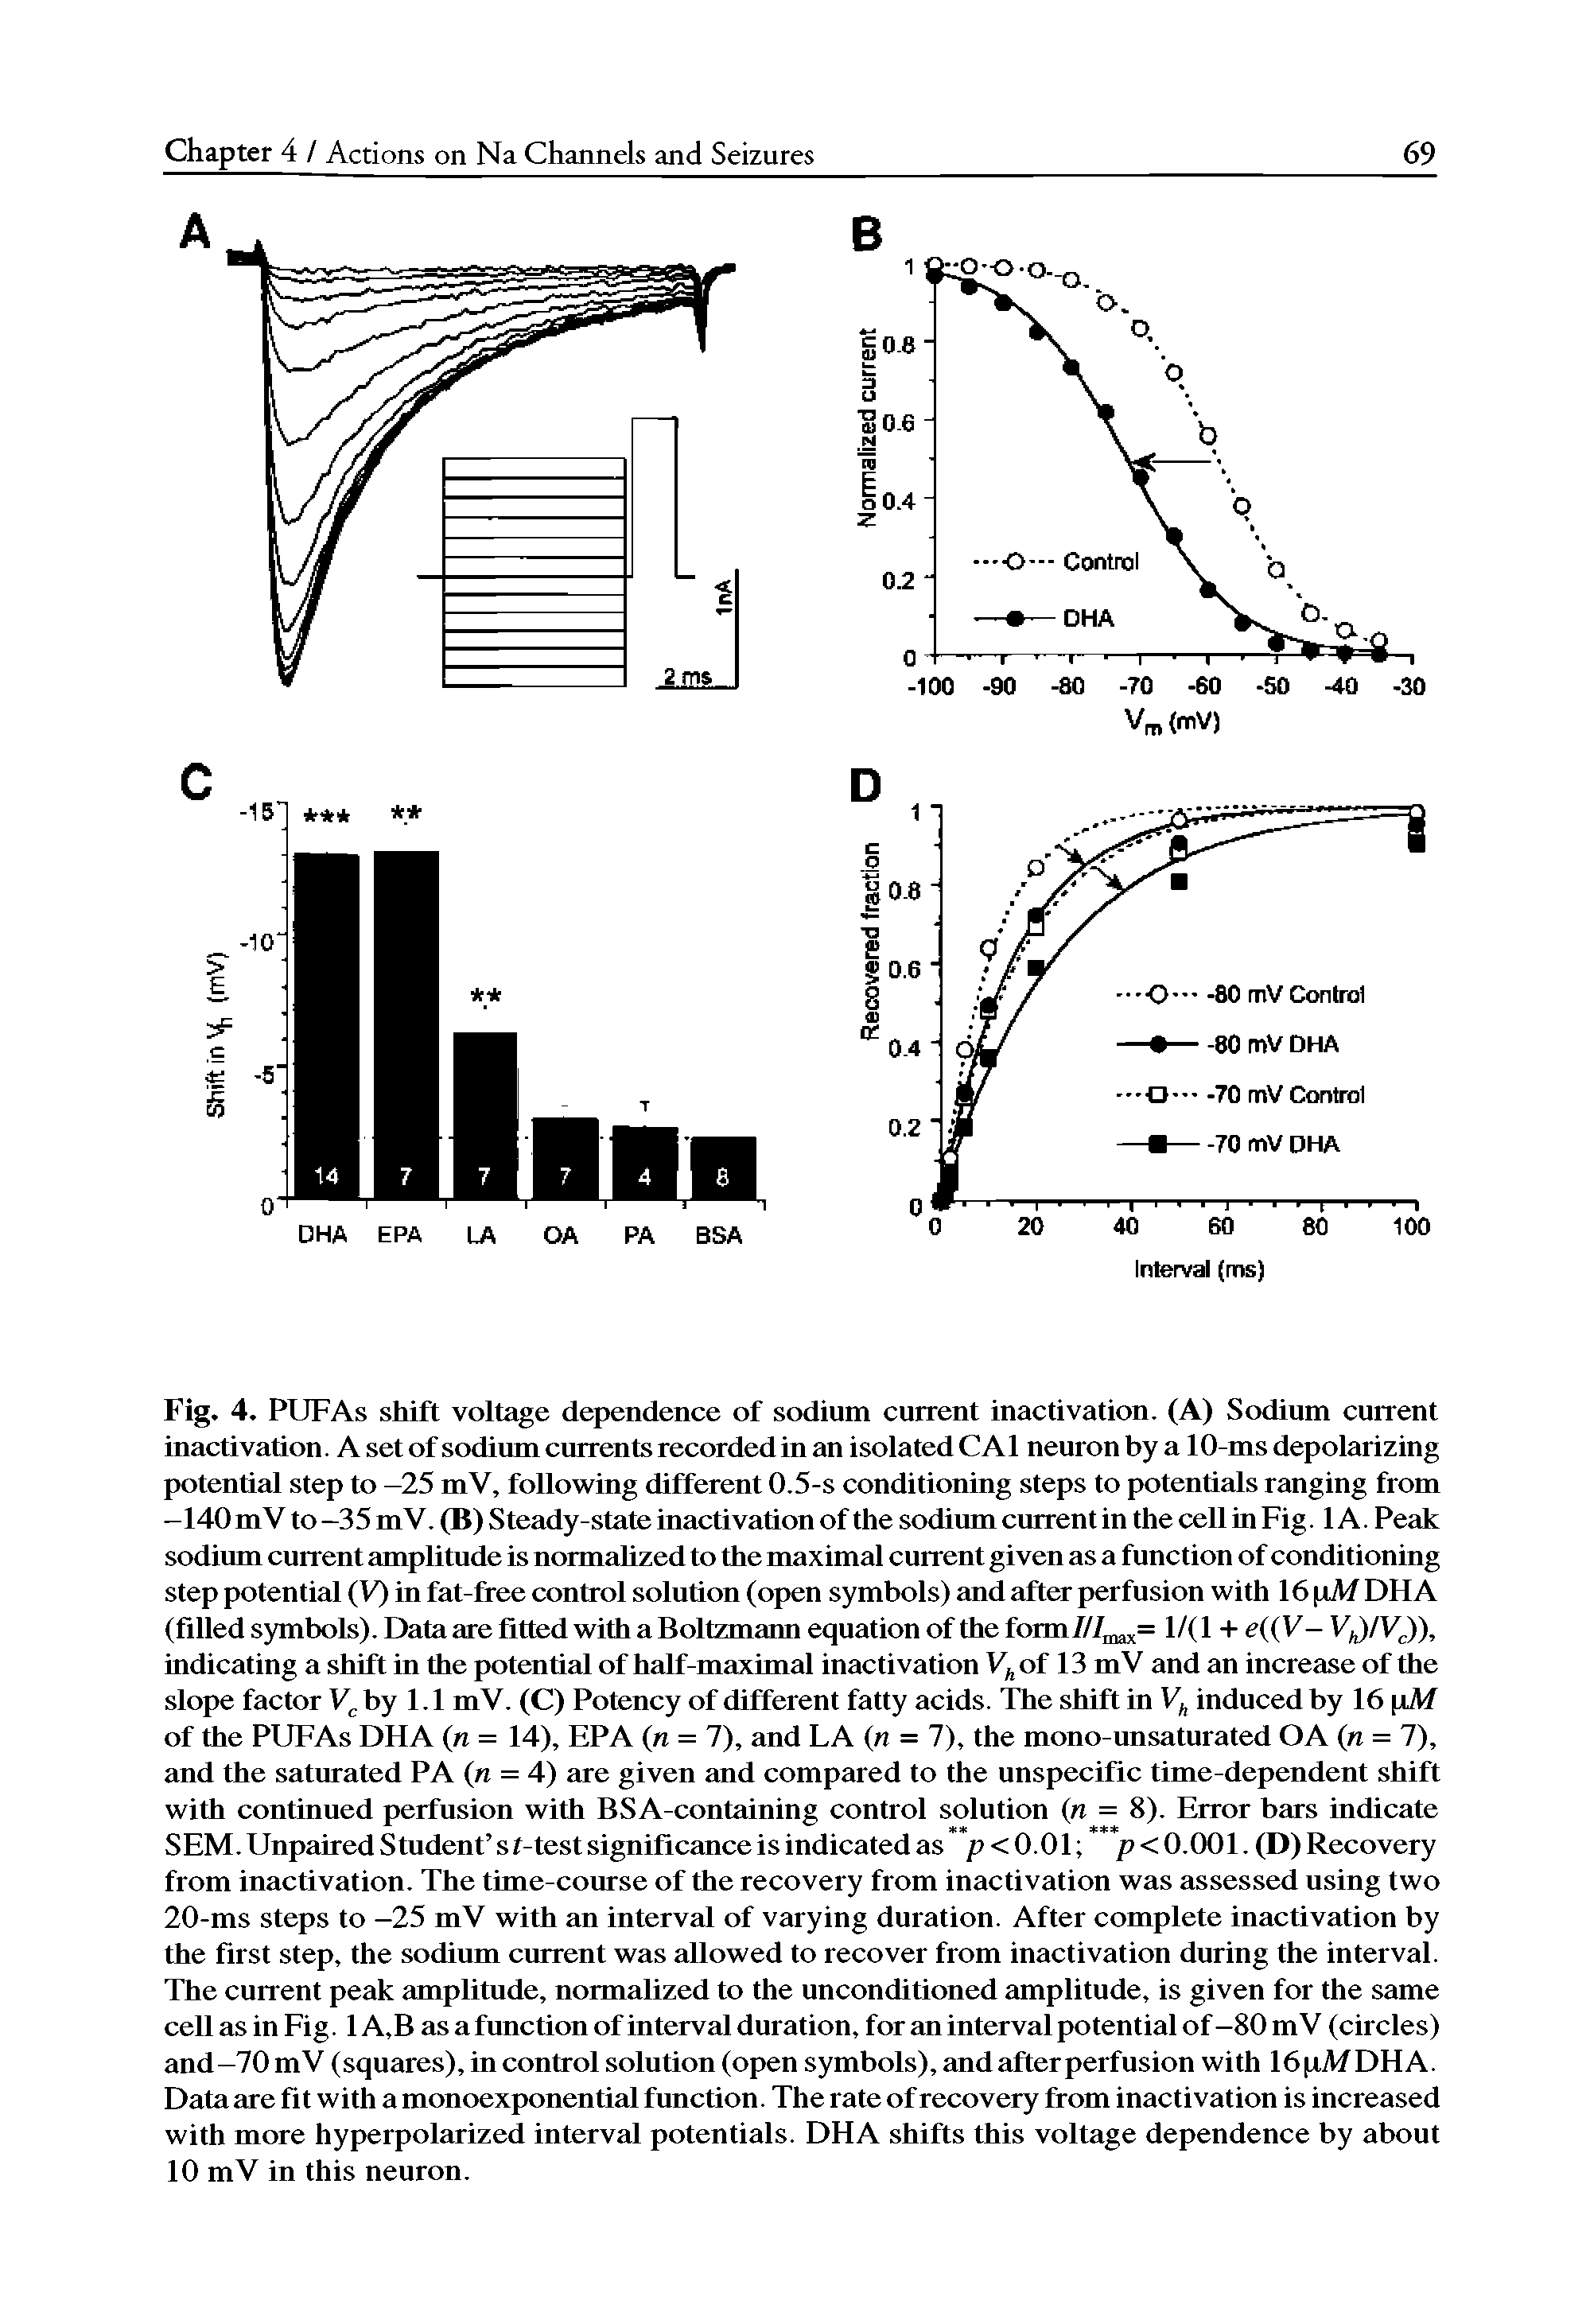 Fig. 4. PUFAs shift voltage dependence of sodium current inactivation. (A) Sodium current inactivation. A set of sodium currents recorded in an isolated CAl neuron by a 10-ms depolarizing potential step to —25 mV, following different 0.5-s conditioning steps to potentials ranging from -140 mV to -35 mV. (B) Steady-state inactivation of the sodium current in the cell in Fig. 1A. Peak sodium current amplitude is normahzed to the maximal current given as a function of conditioning step potential (V) in fat-free control solution (open symbols) and after perfusion with 16 pzW DHA (filled symbols). Data are fitted with a Boltzmann equation of the form 1/(1 -E e(( V- V )/VJ),...